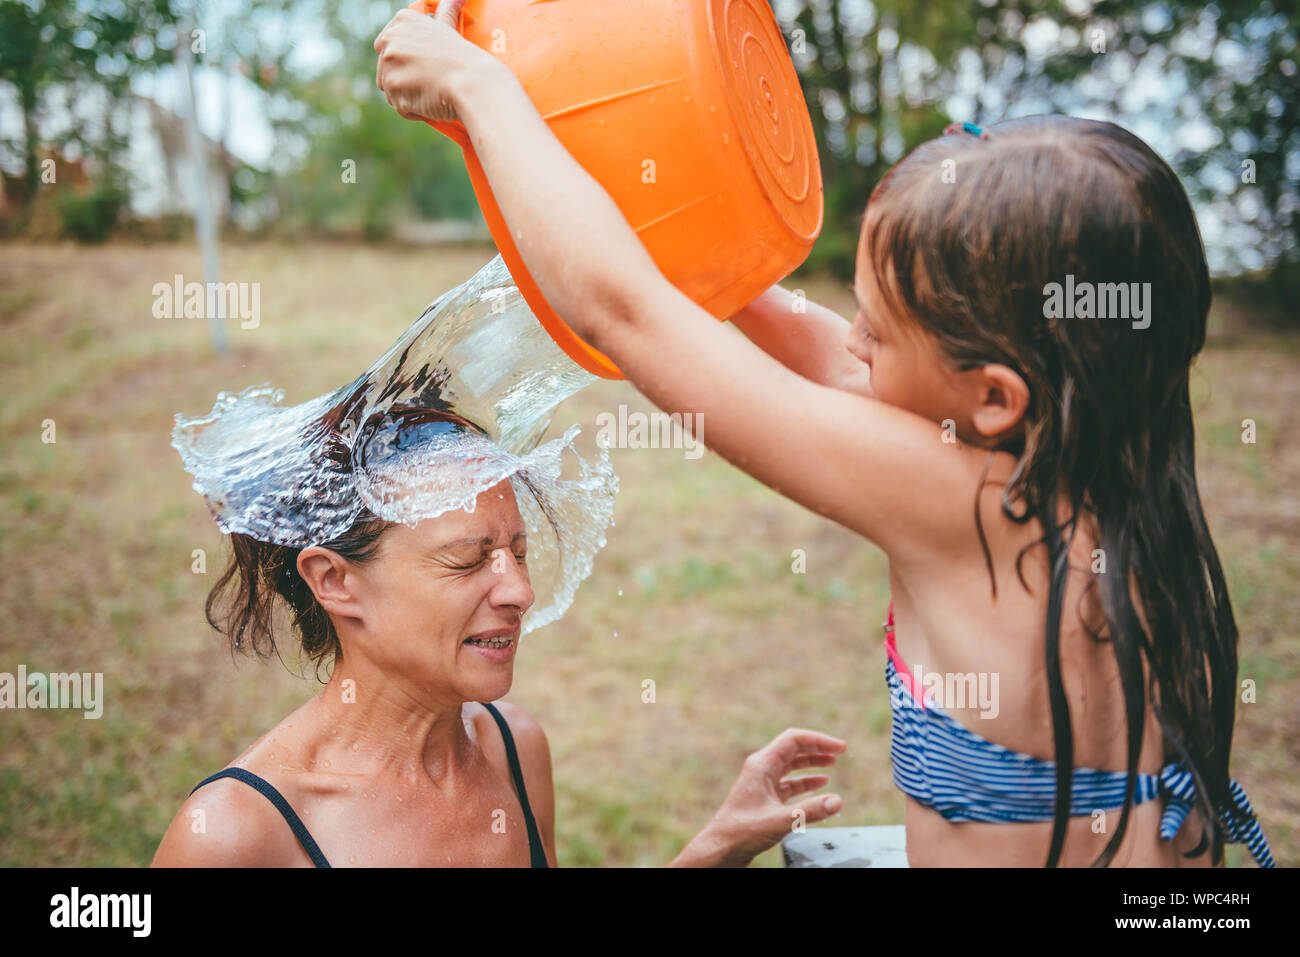 Mother getting splashed by a stream of water in her face Stock Photo